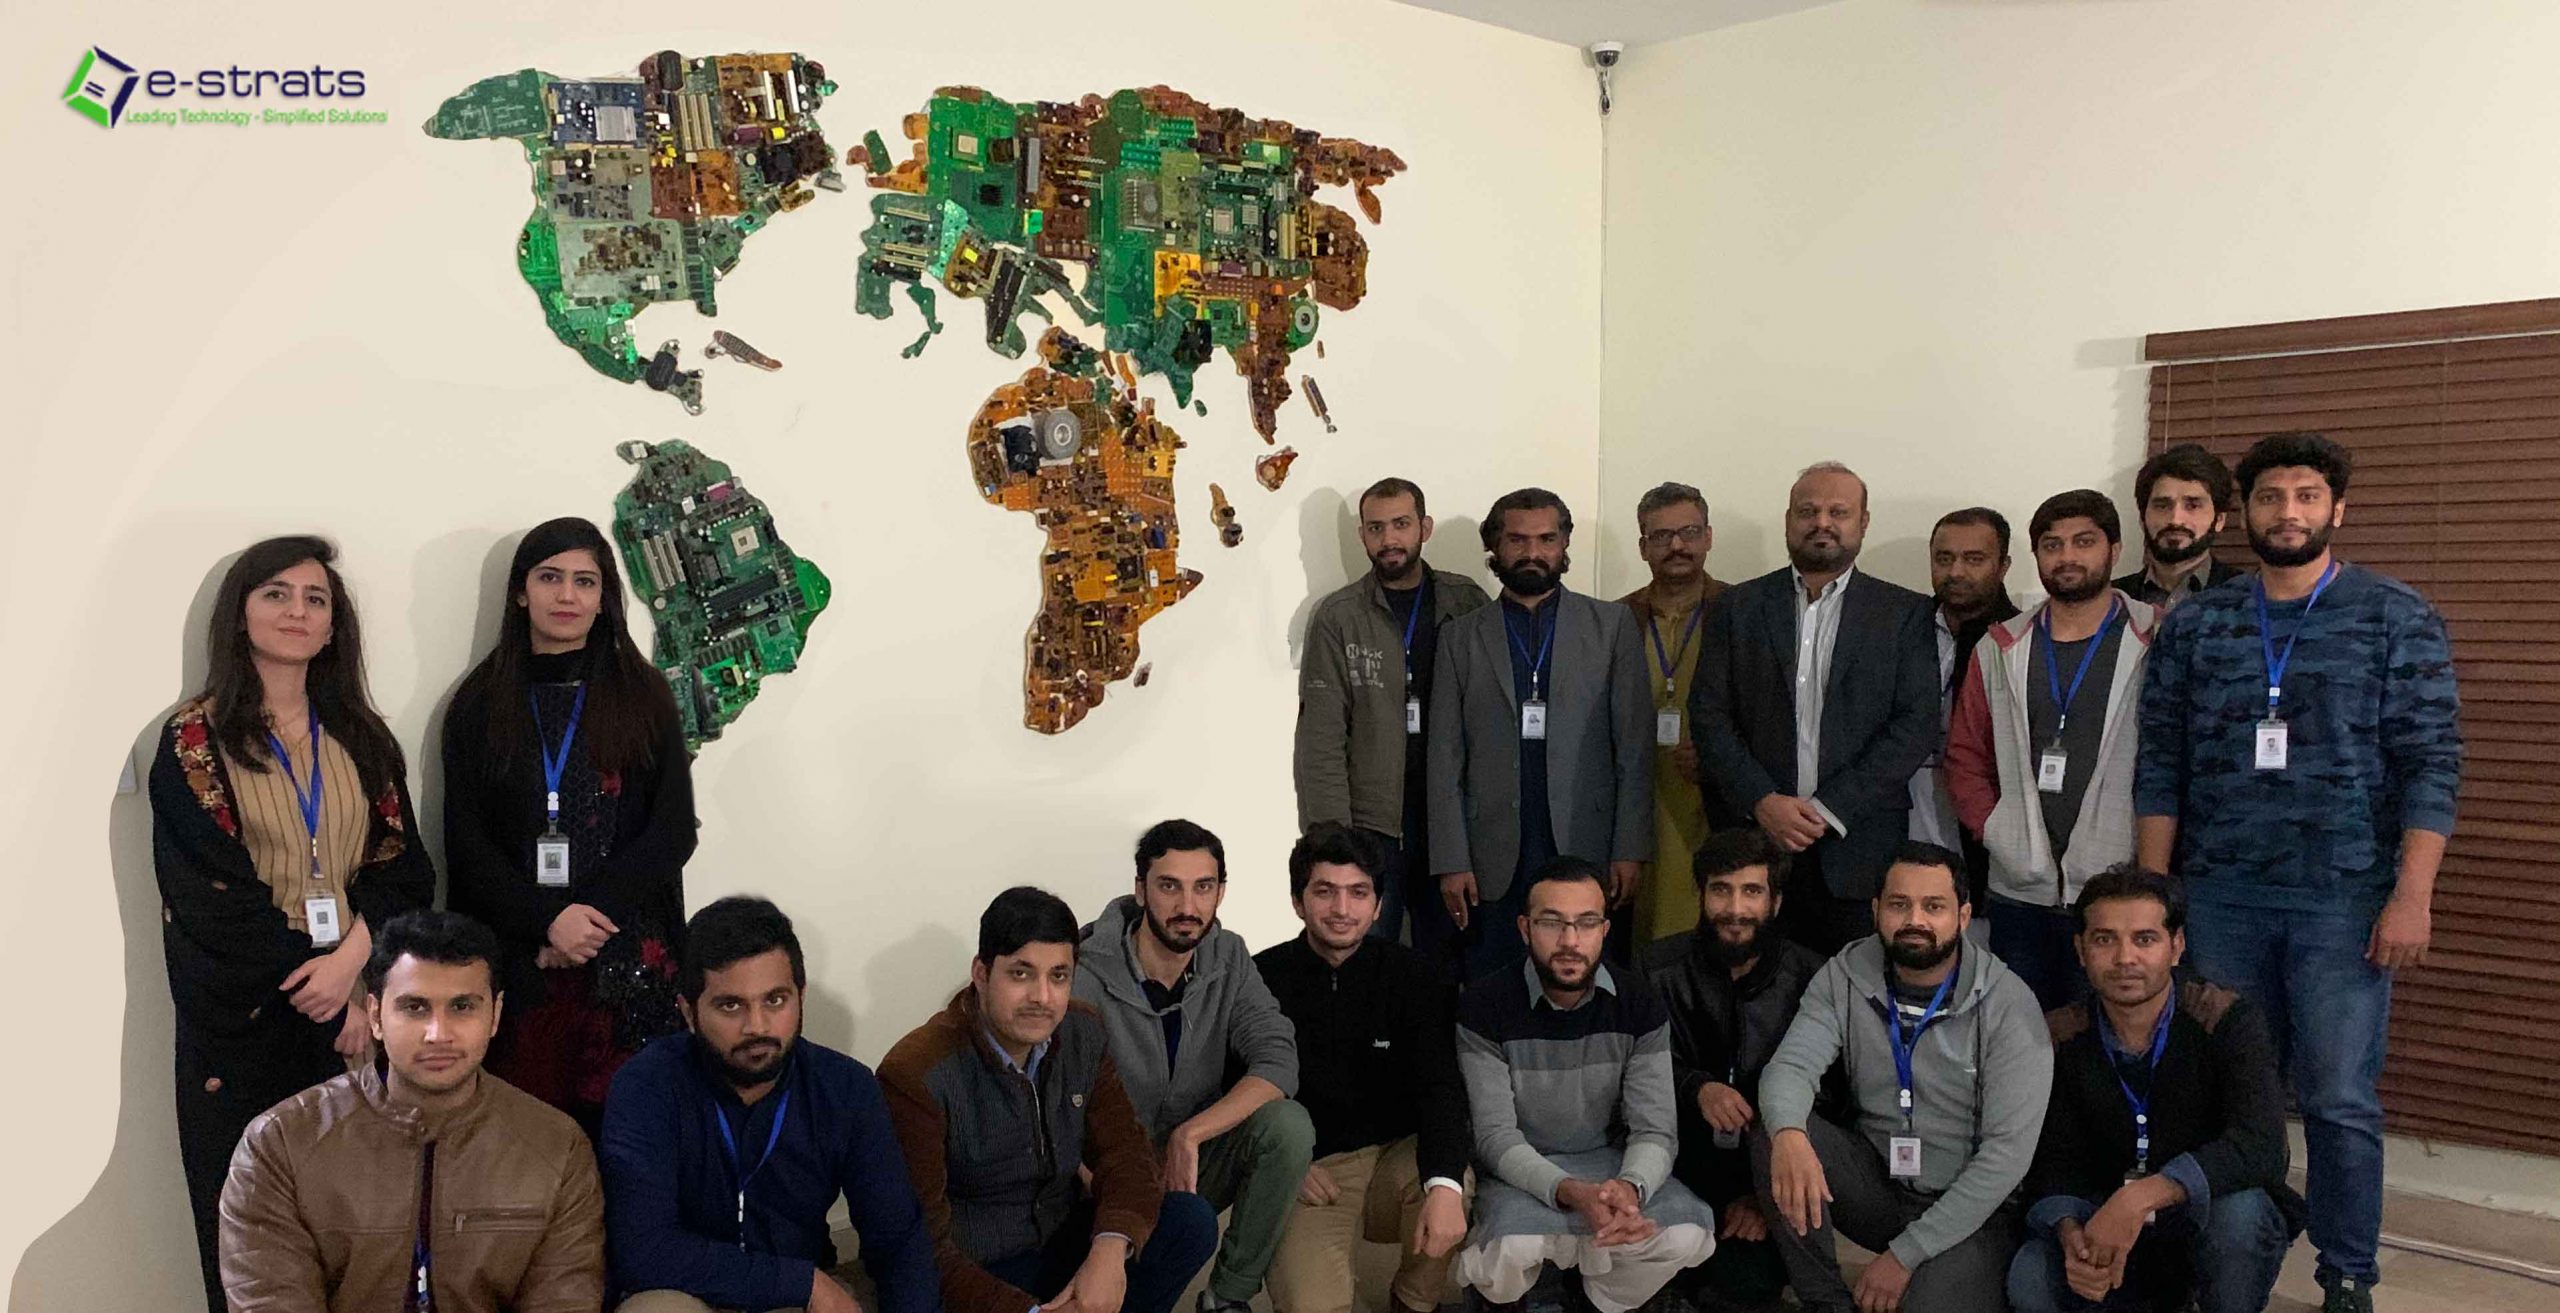 team of e-strats IT company posing infront of a world map made out of e-scrap